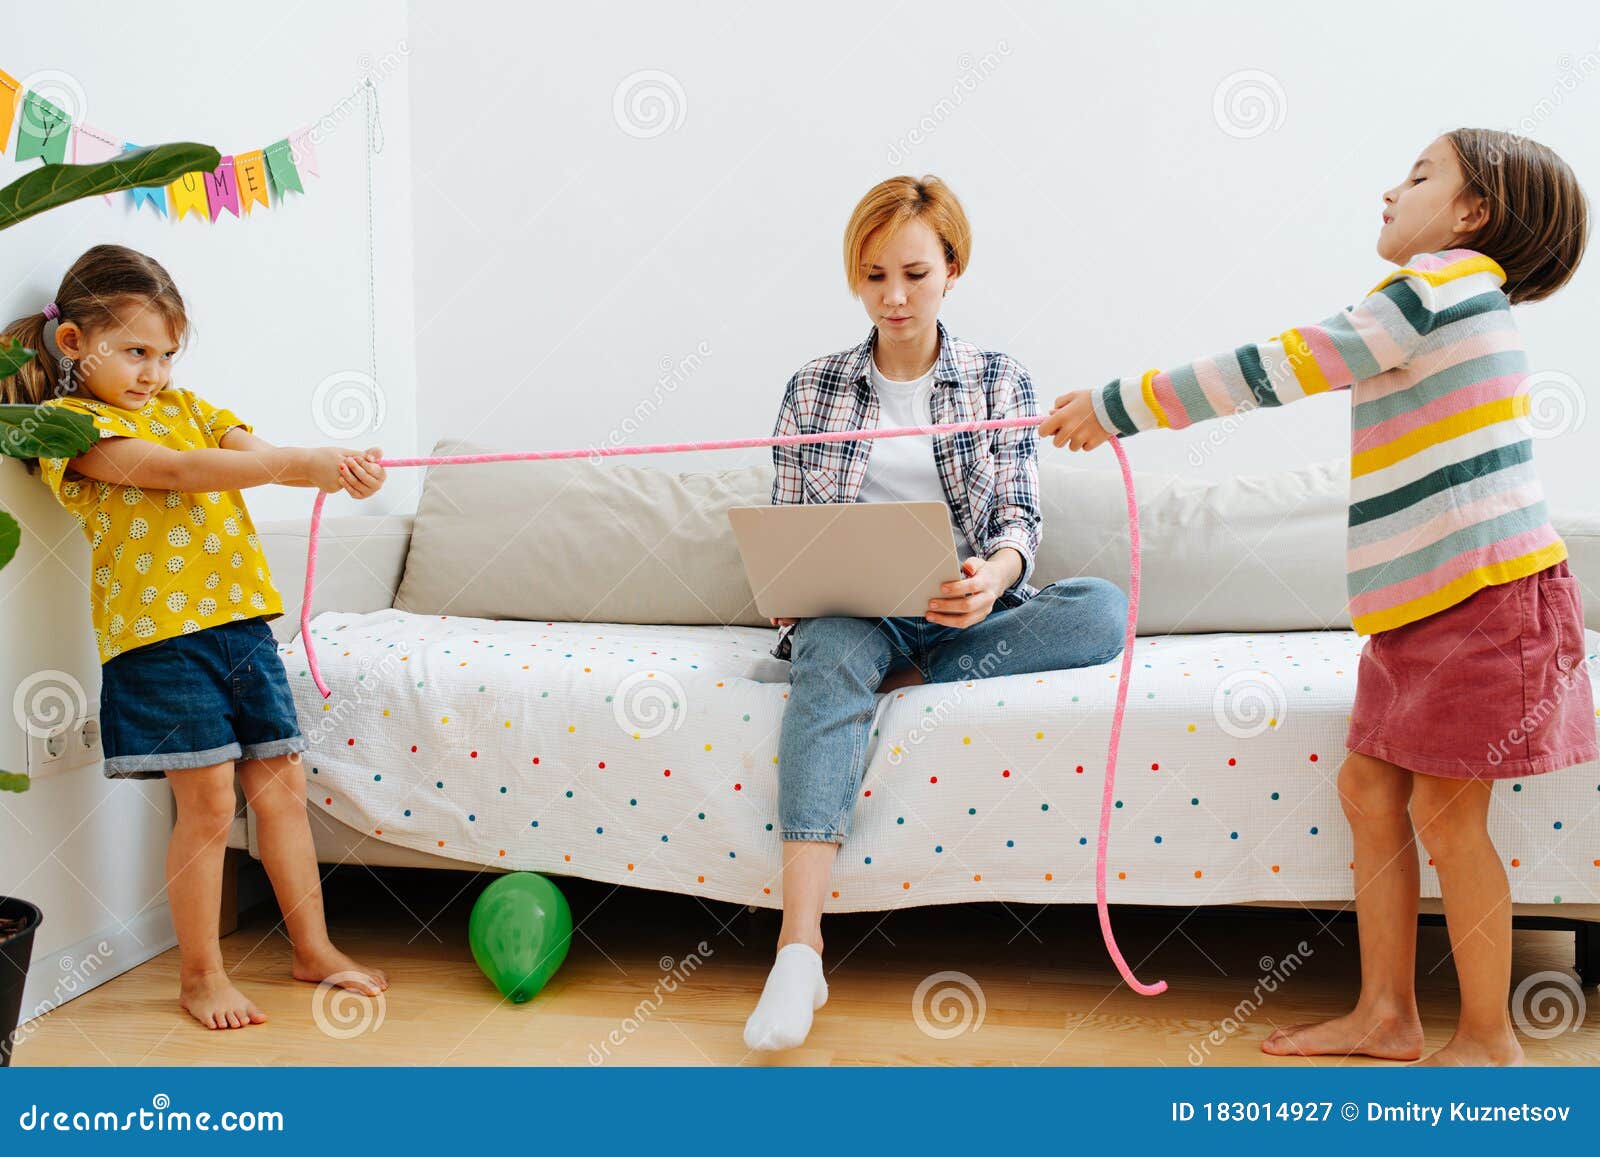 Kids Pulling A Rope From Each Other Next To Their Working Mom Stock Image Image Of Garland Fashion 183014927